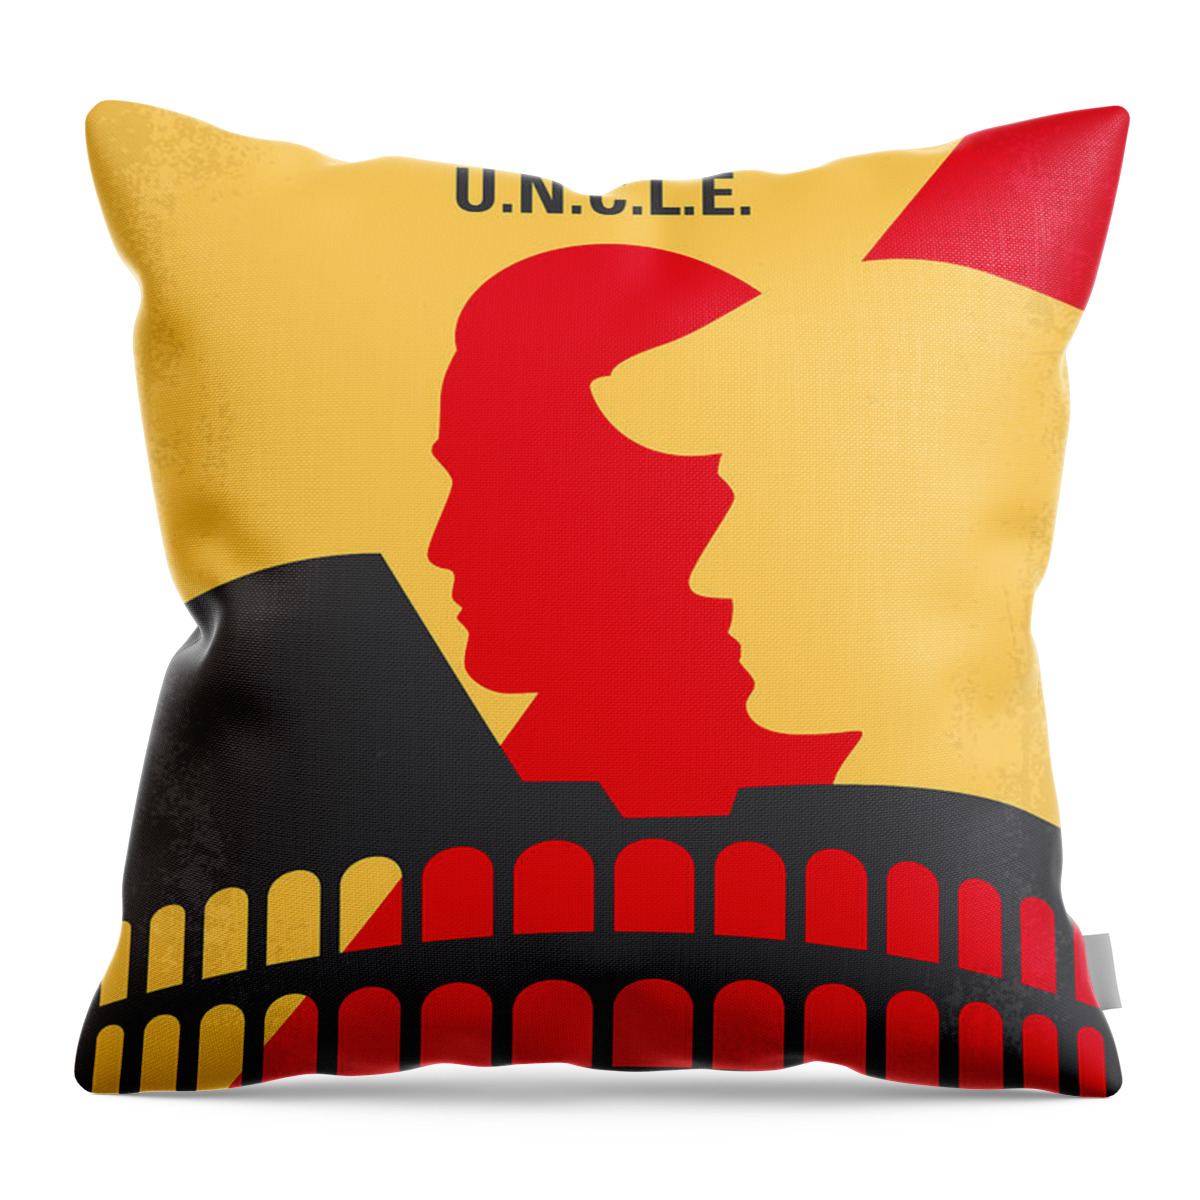 Man From Uncle Throw Pillow featuring the digital art No572 My Man from UNCLE minimal movie poster by Chungkong Art